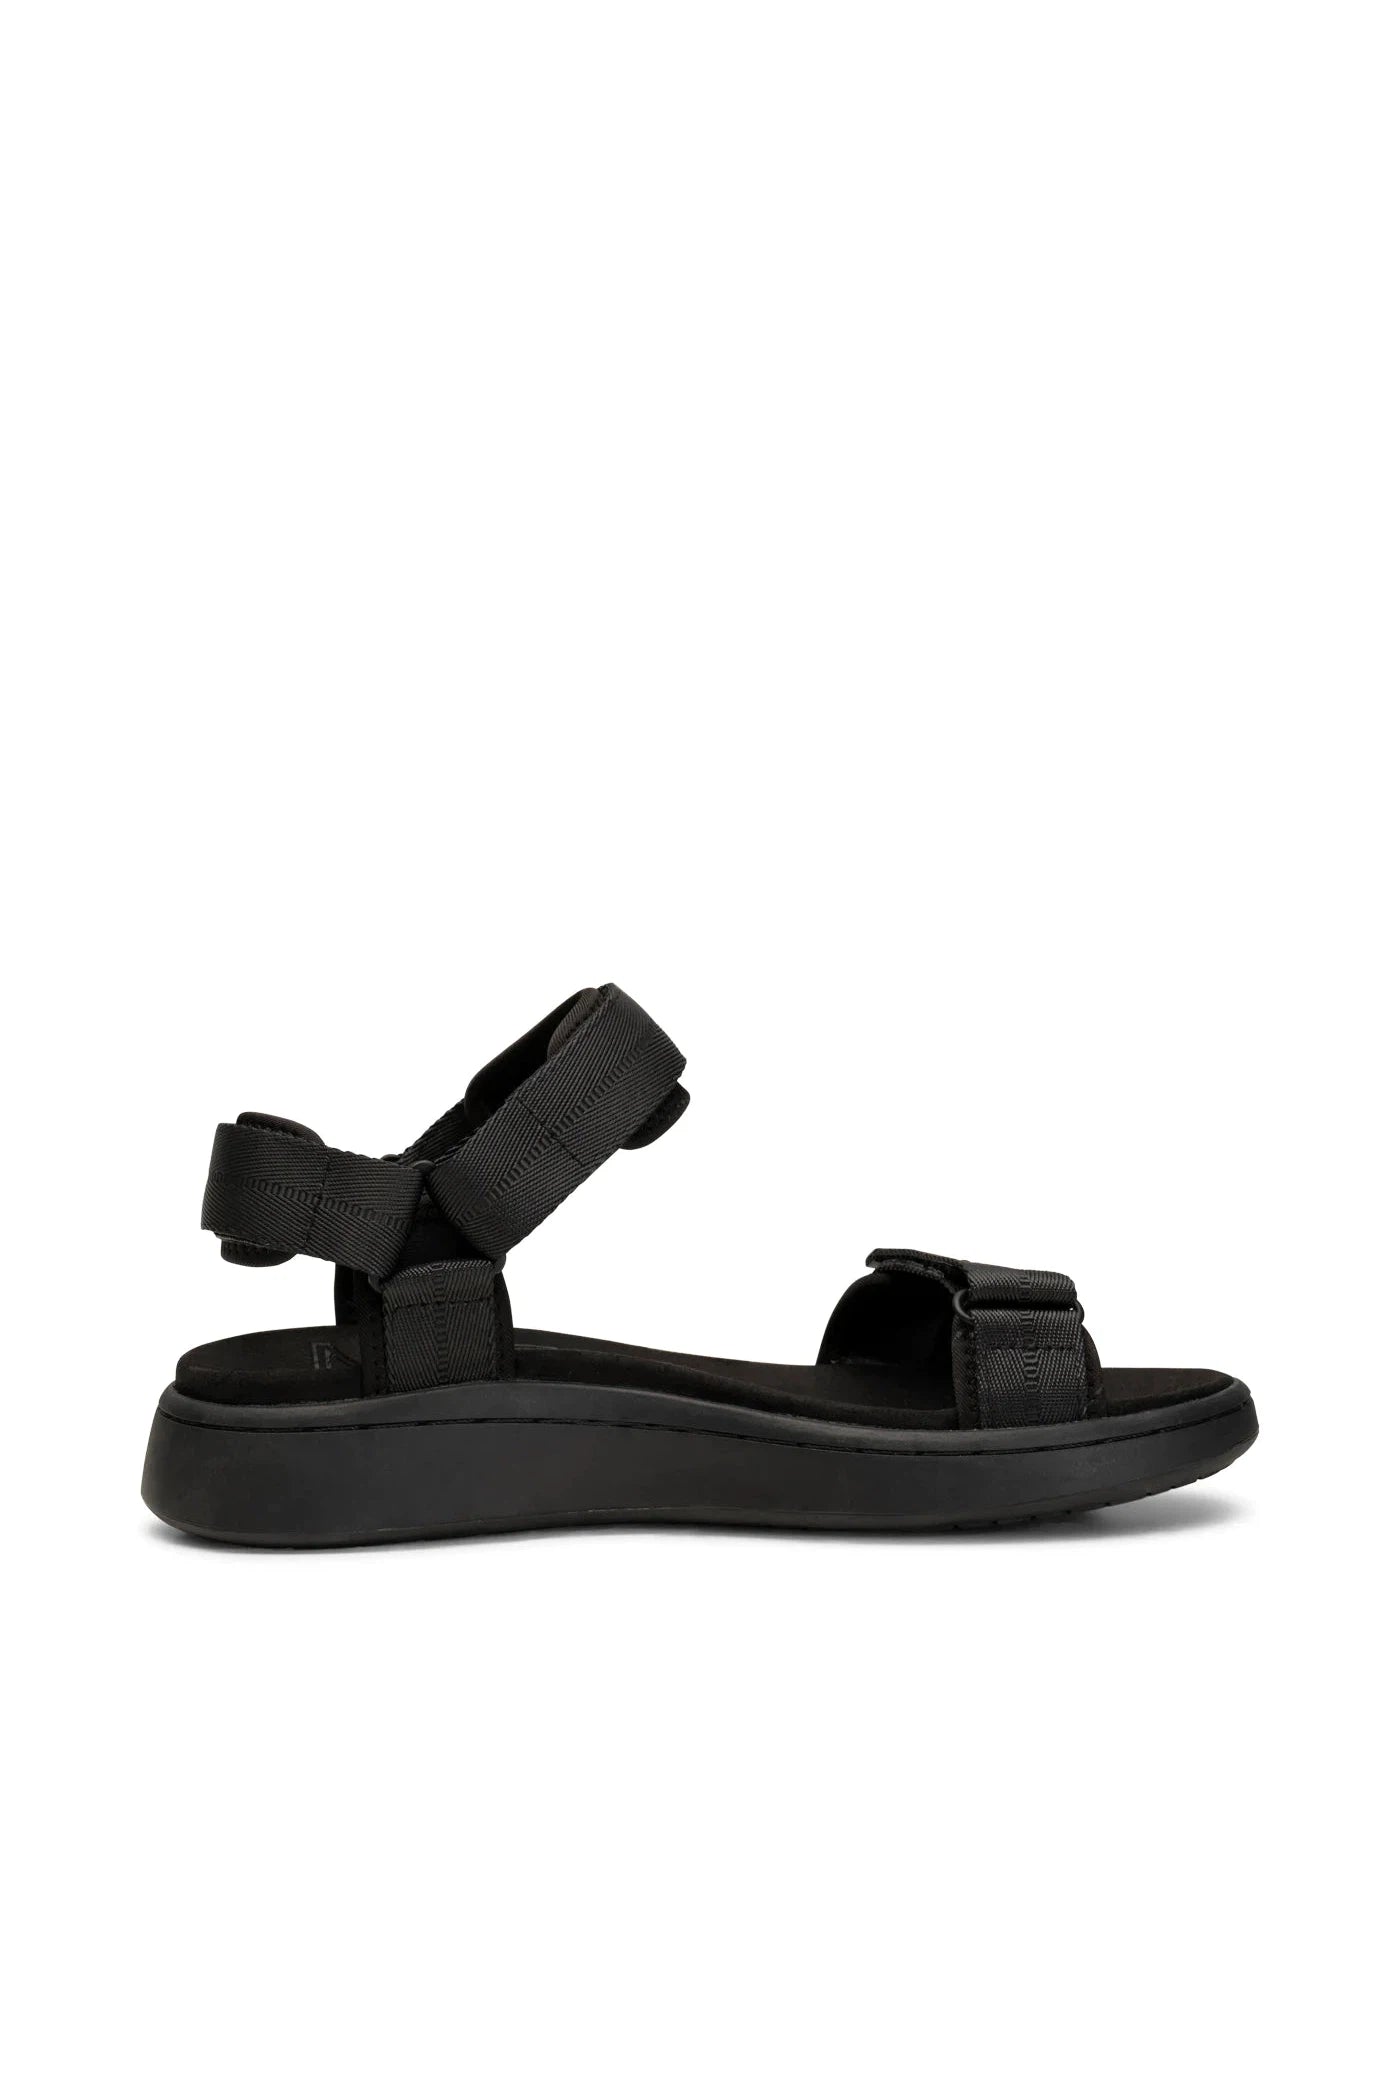 Woden Sandals - Black/Black-Accessories-Ohh! By Gum - Shop Sustainable